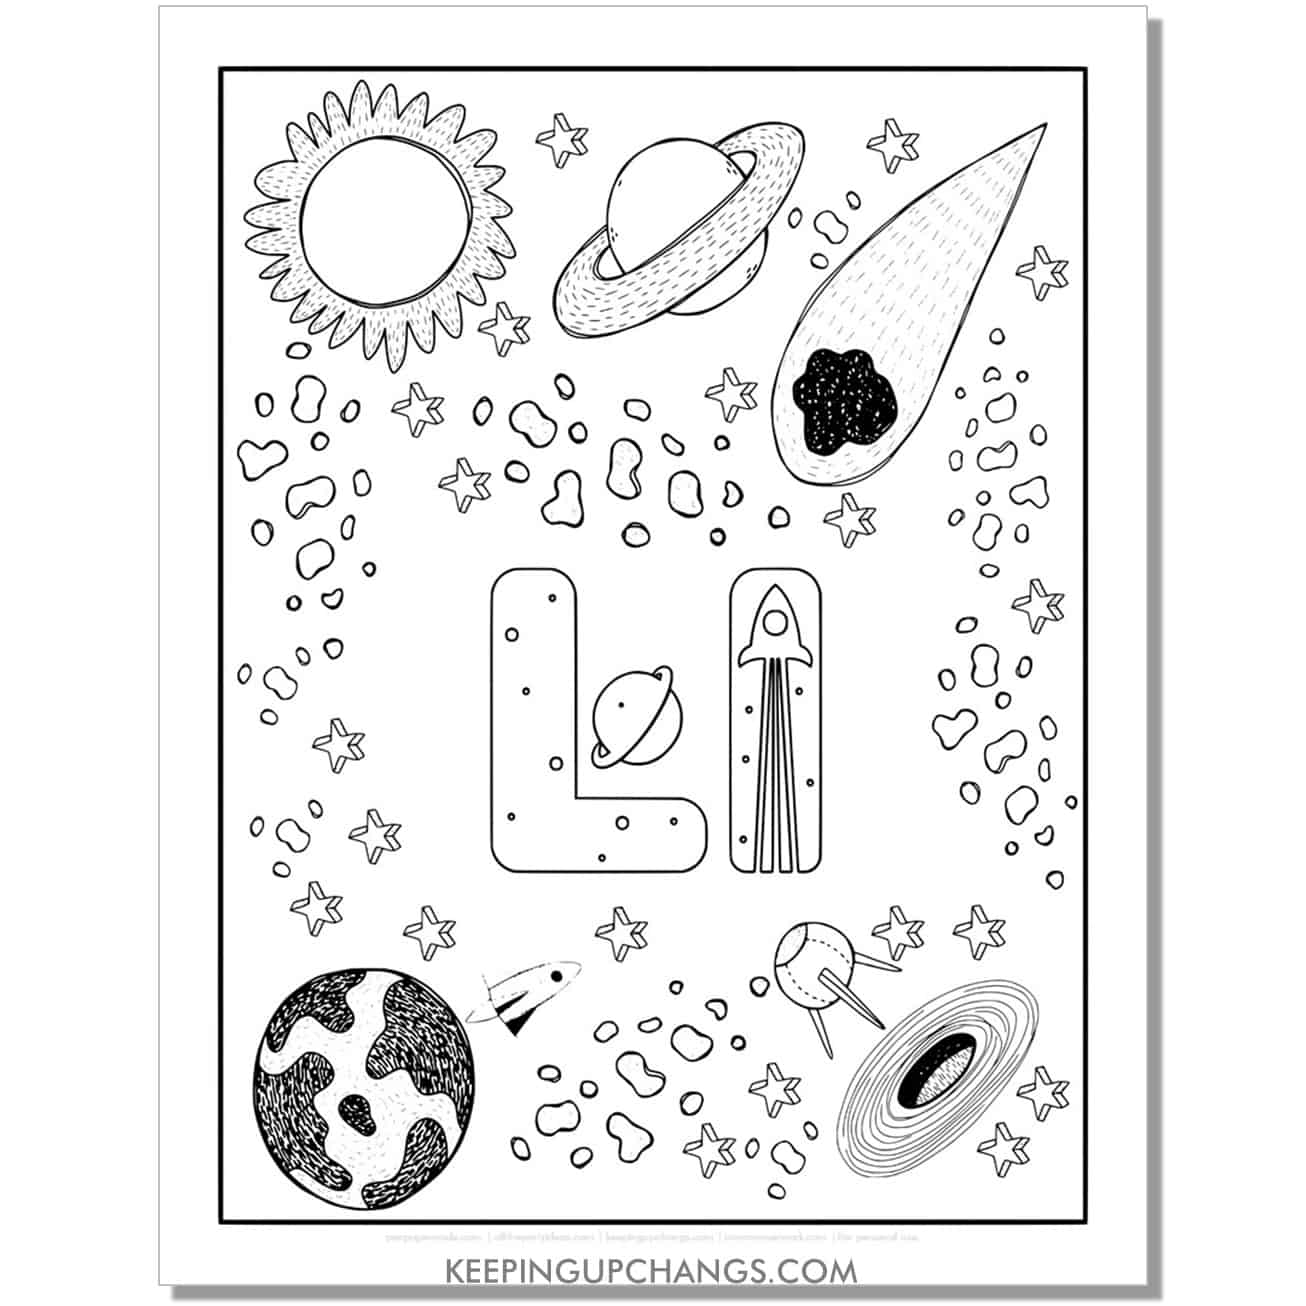 free alphabet letter l coloring page for kids with rockets, space theme.